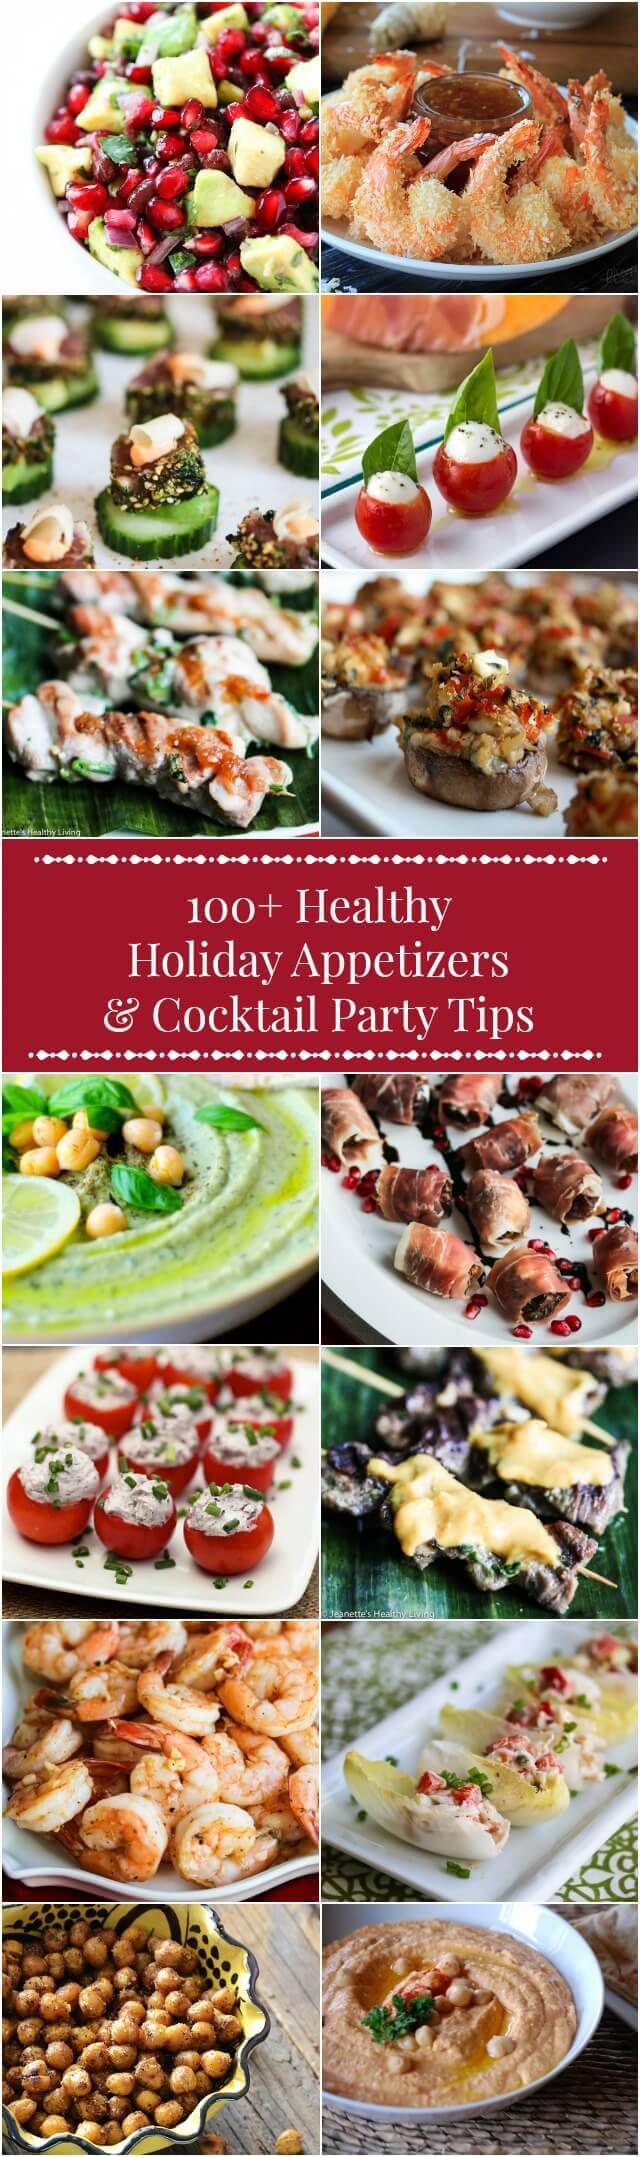 100+ Healthy Holiday Appetizers & Cocktail Party Tips - PIN this now to refer to throughout the holiday season - healthy nibbles, finger foods, dips, salsas and more + helpful tips for making sure your cocktail party goes smoothly